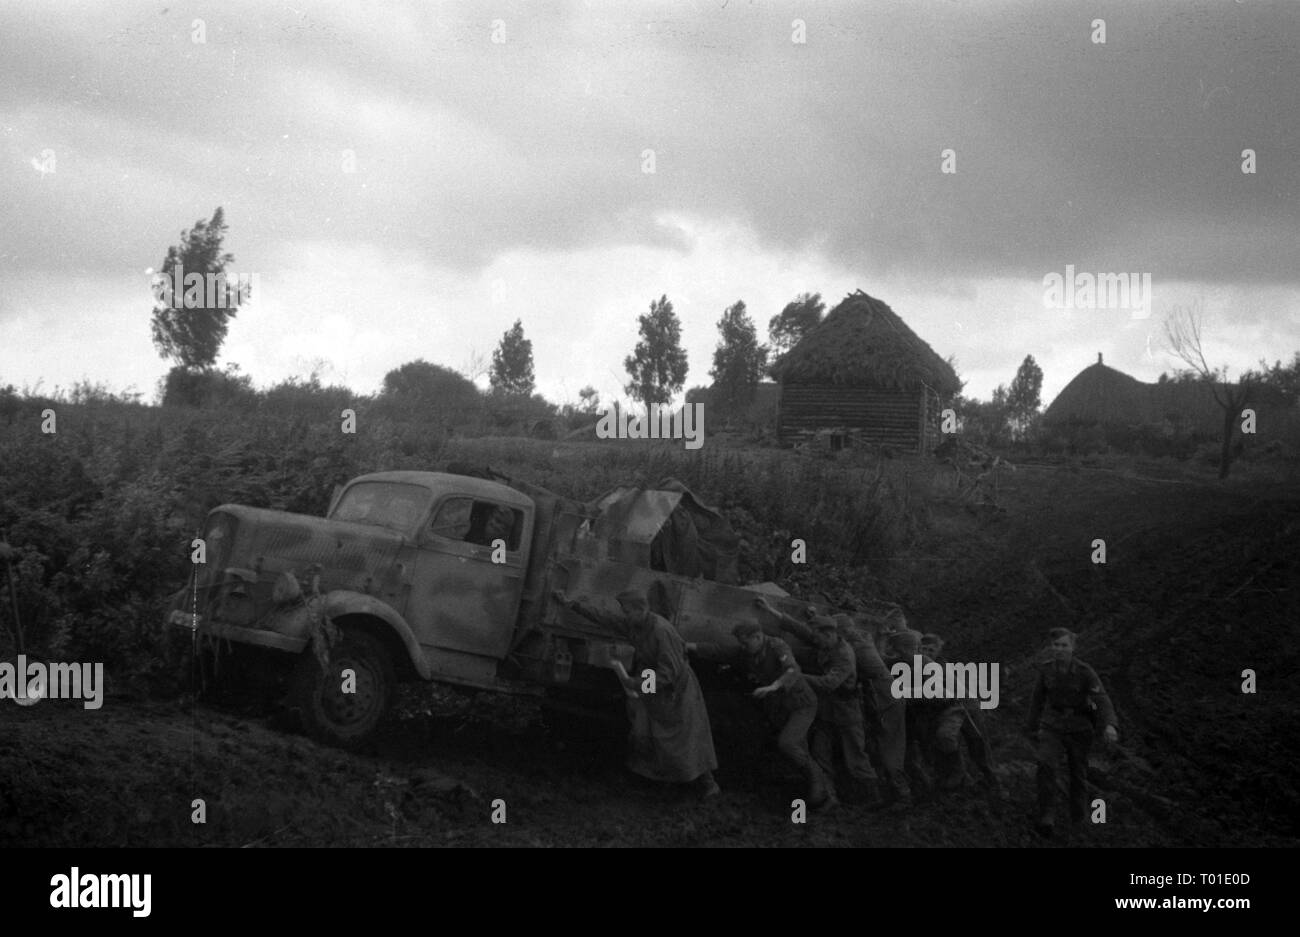 Wehrmacht Heer Ostfront OPEL BLITZ mit Flak 38 2cm - German Army at the Eastern Front OPEL BLitz with Anti Aircraft Gun Flak 38 20mm Stock Photo